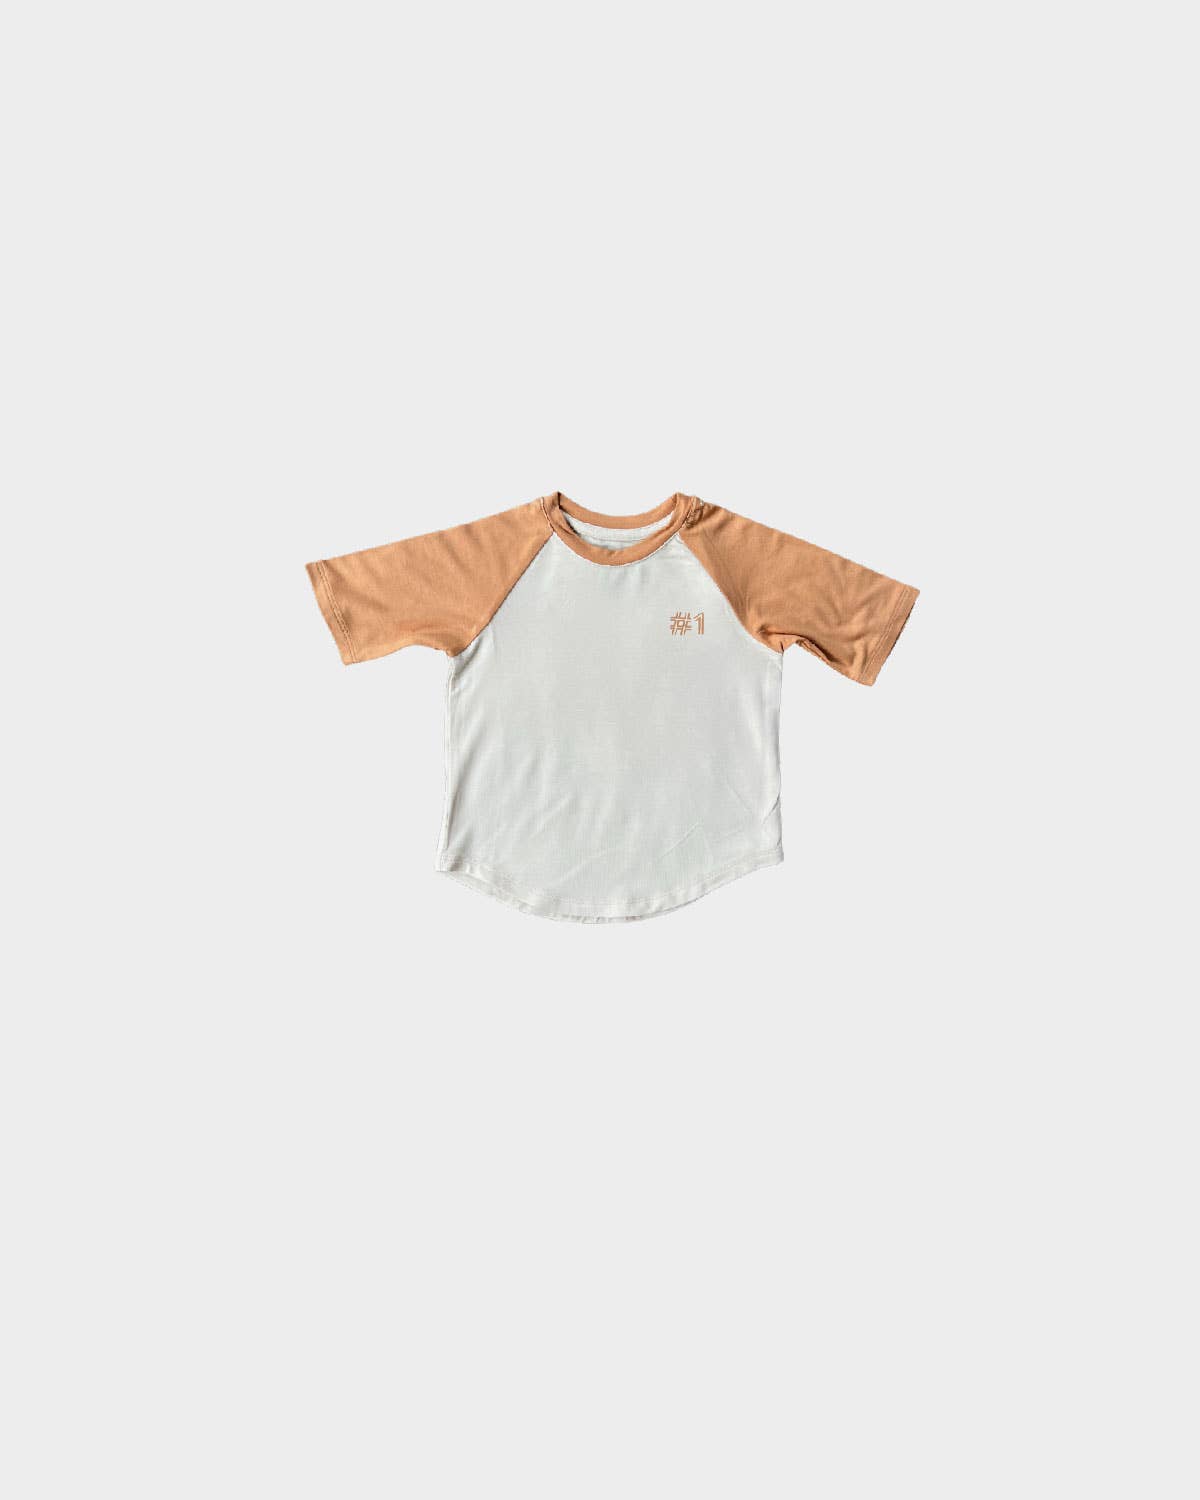 babysprouts clothing company - S24 D1: Baseball Tee in #1